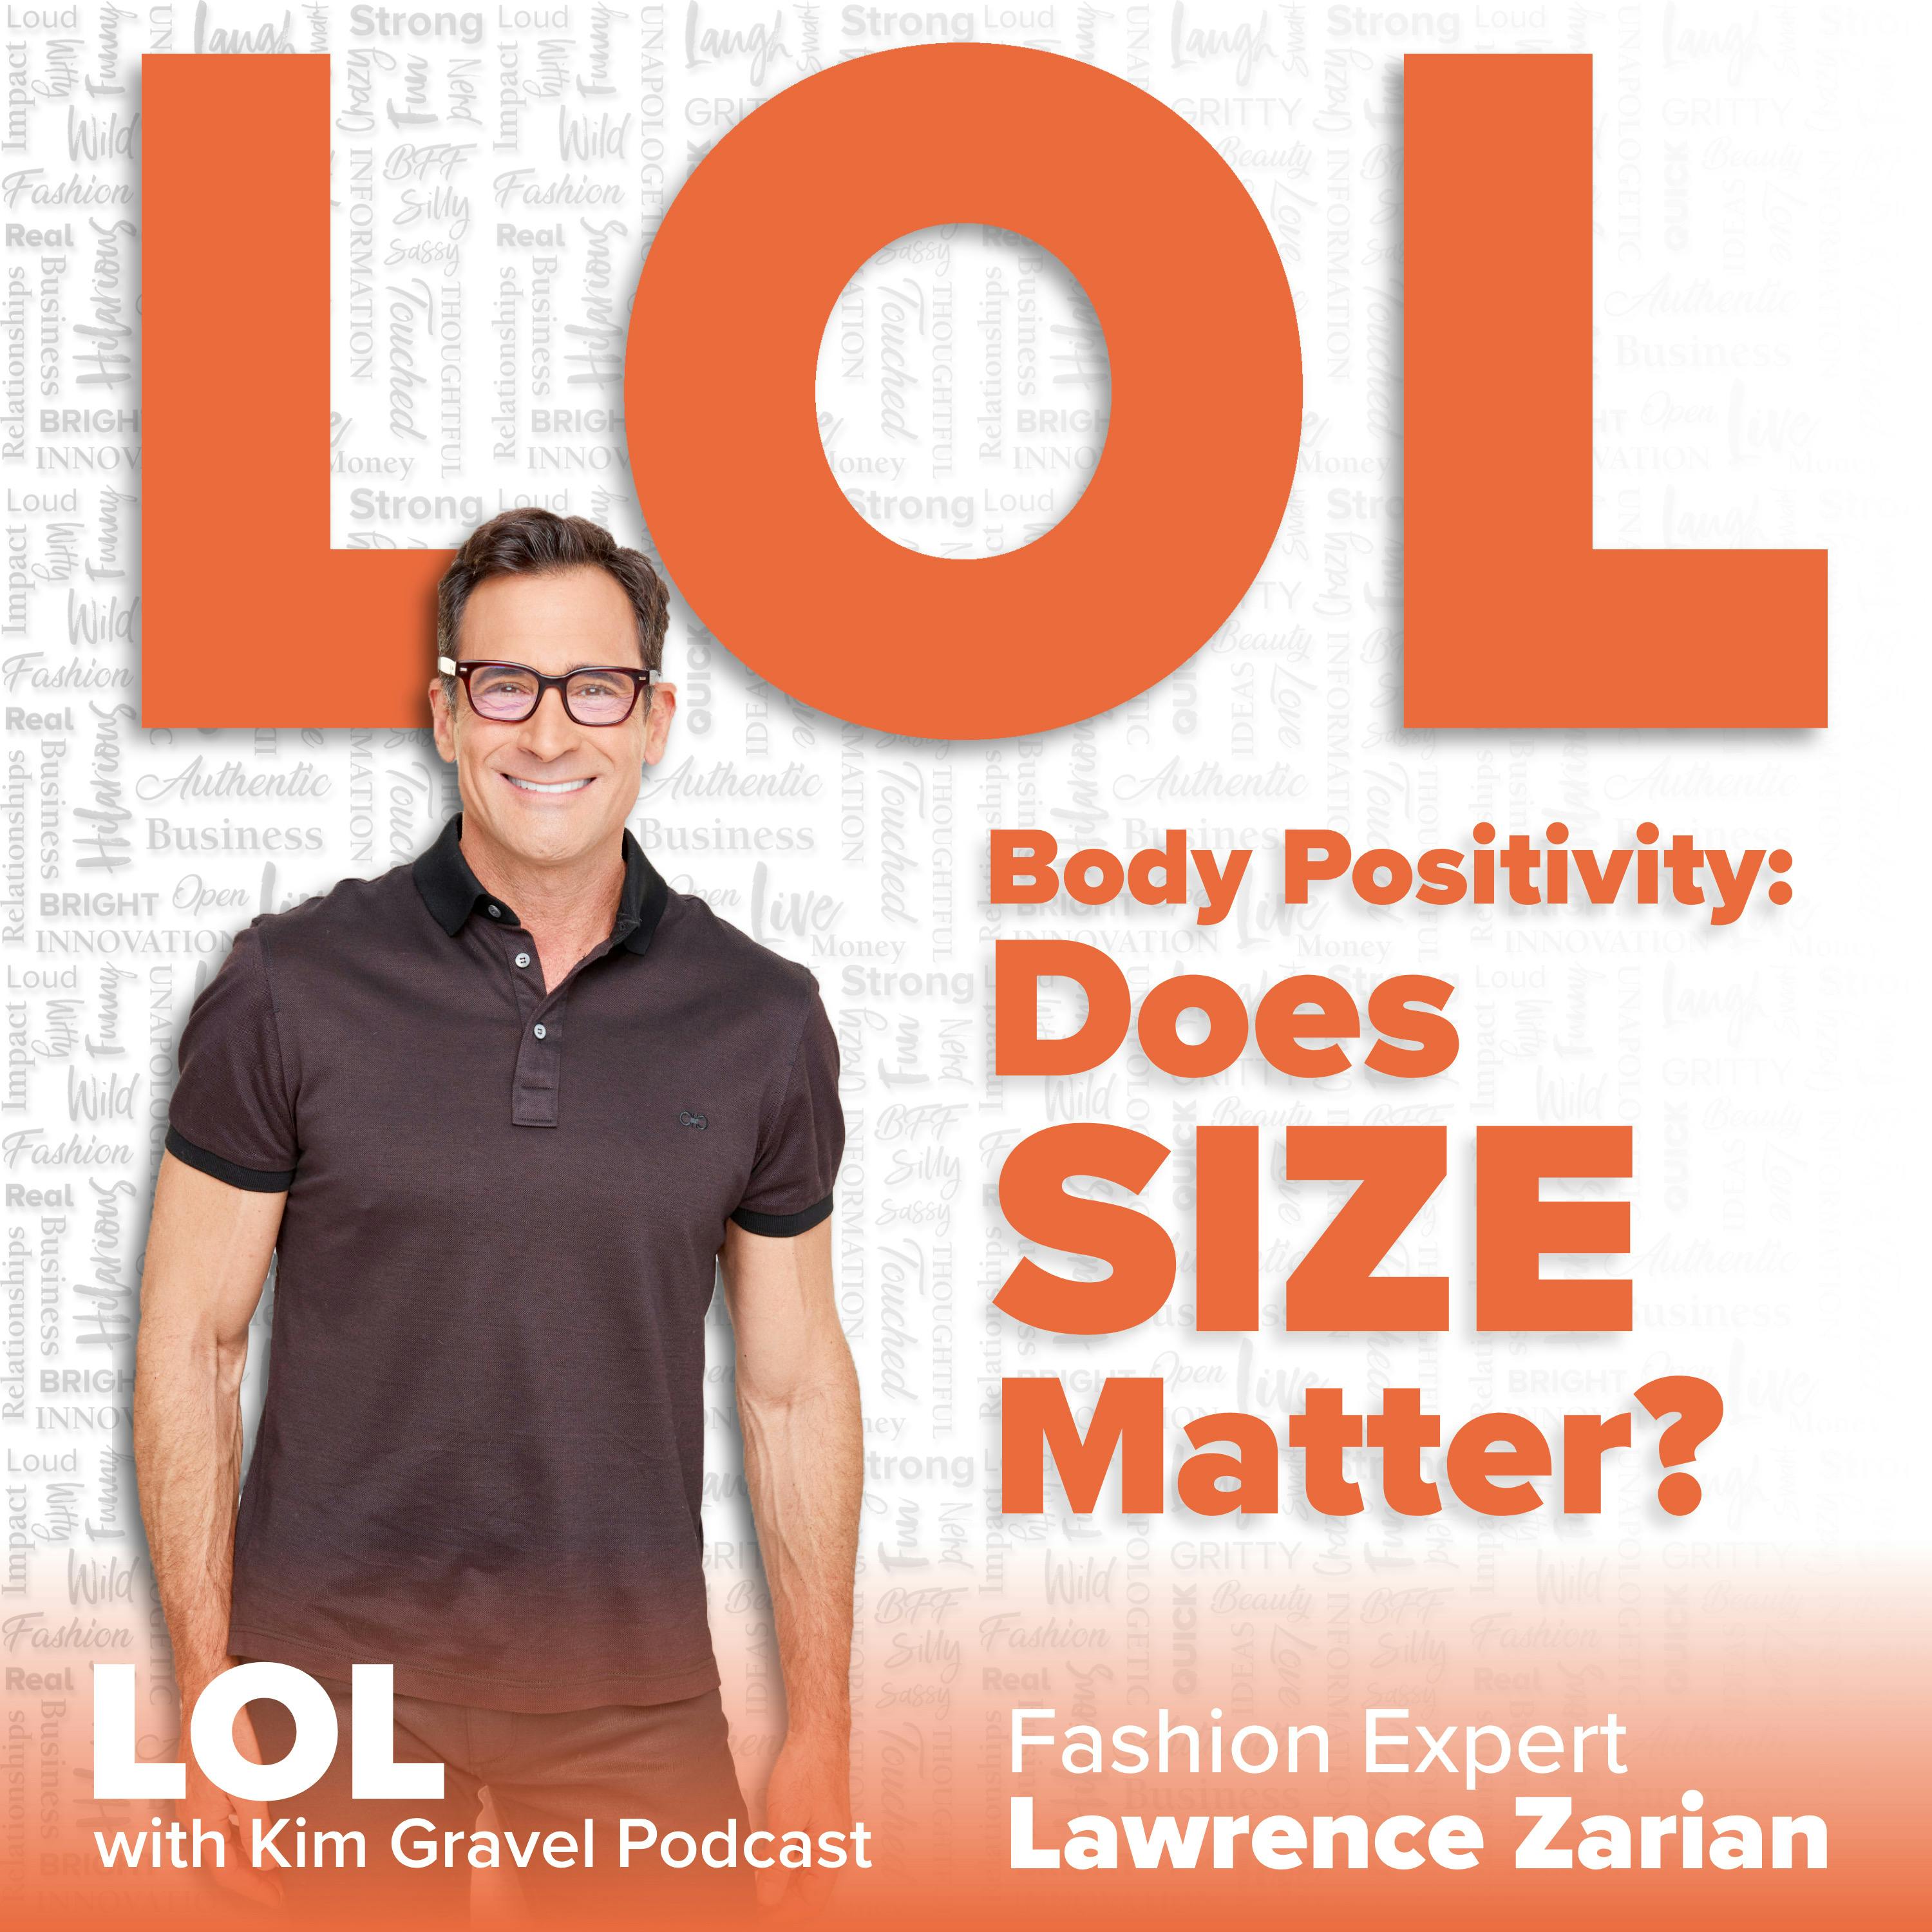 Body Positivity: Does Size Matter? with Lawrence Zarian